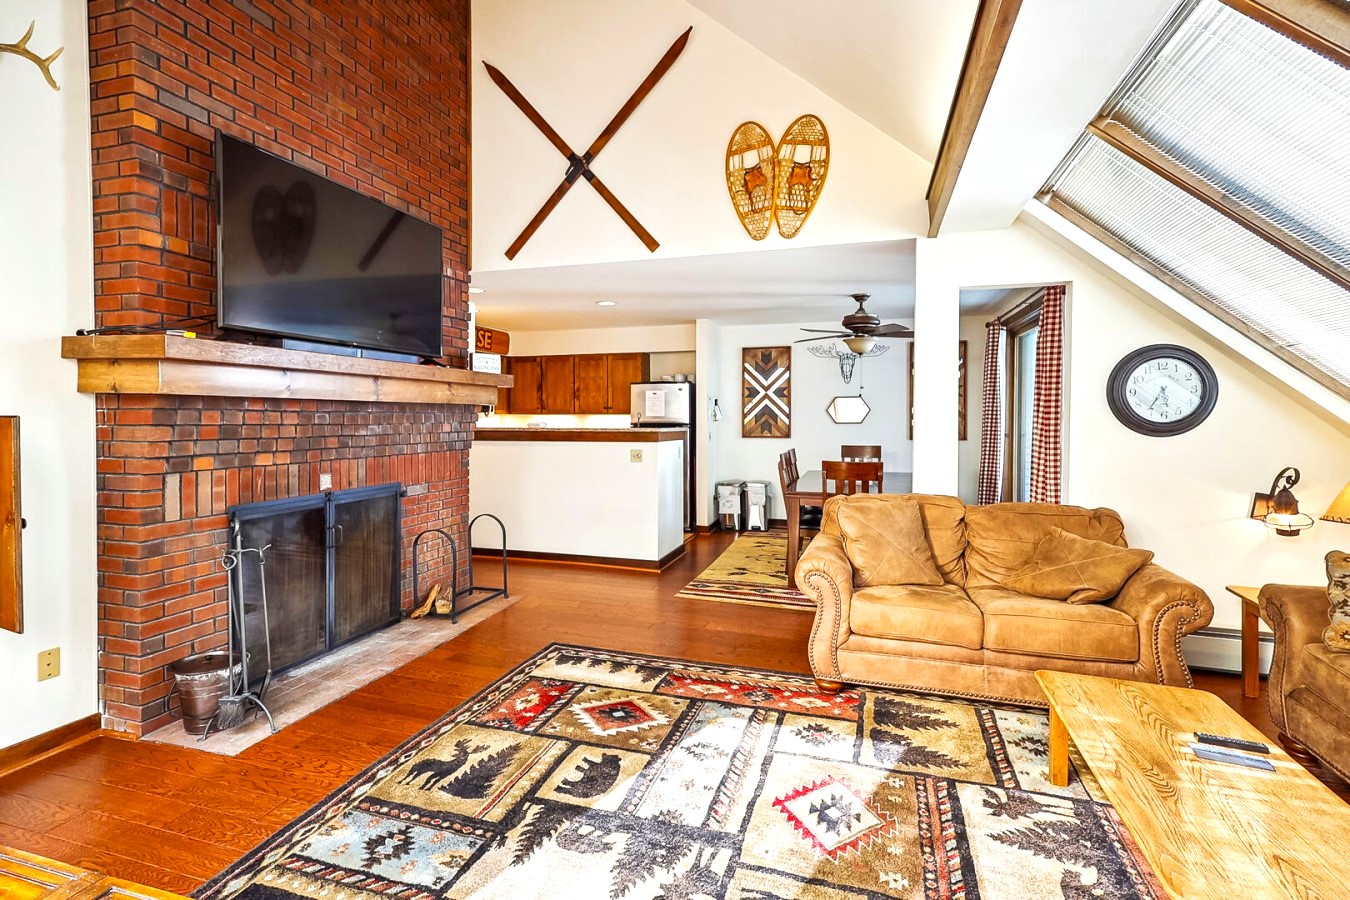 Living room with large fireplace and vintage ski décor hung on the walls. 